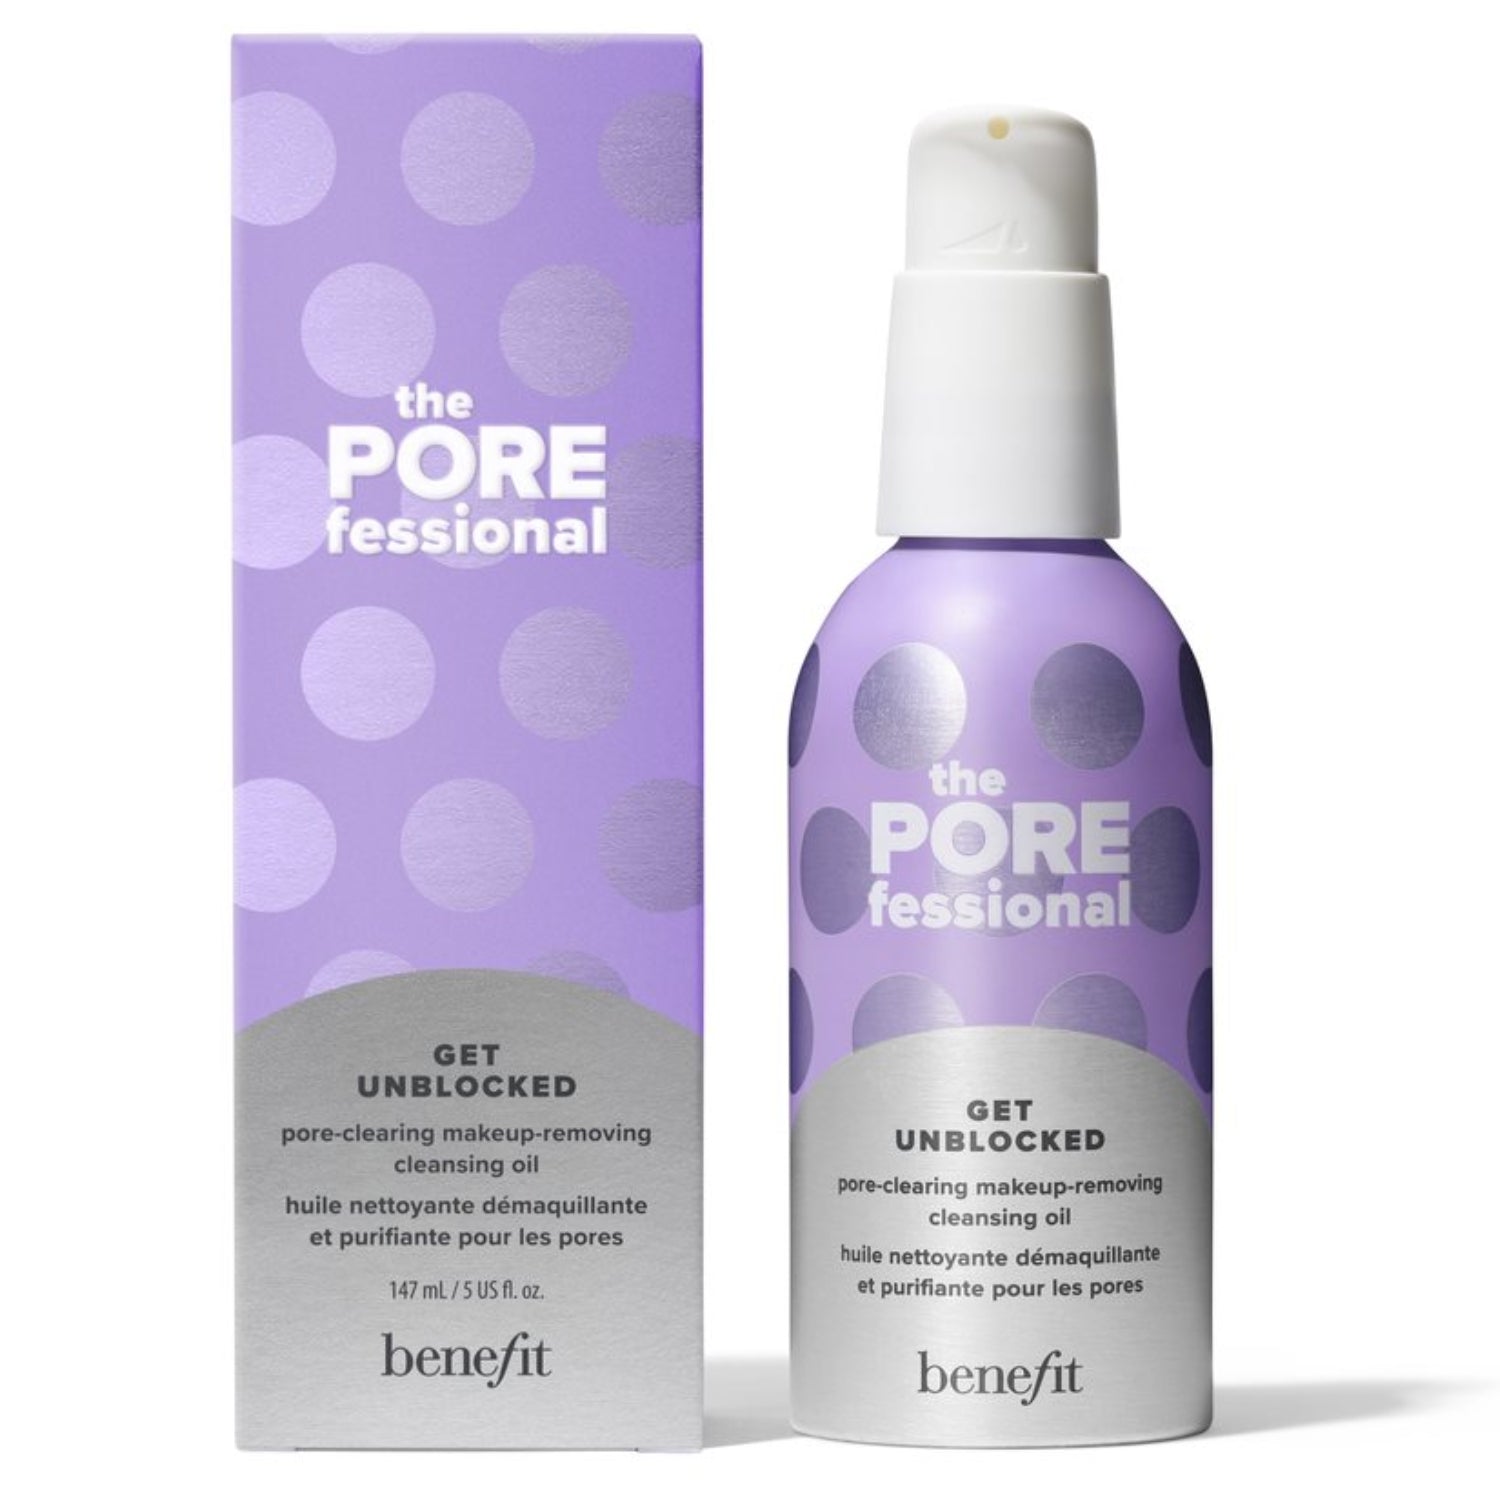 Benefit The POREfessional Get Unblocked Cleansing Oil 2 Shaws Department Stores